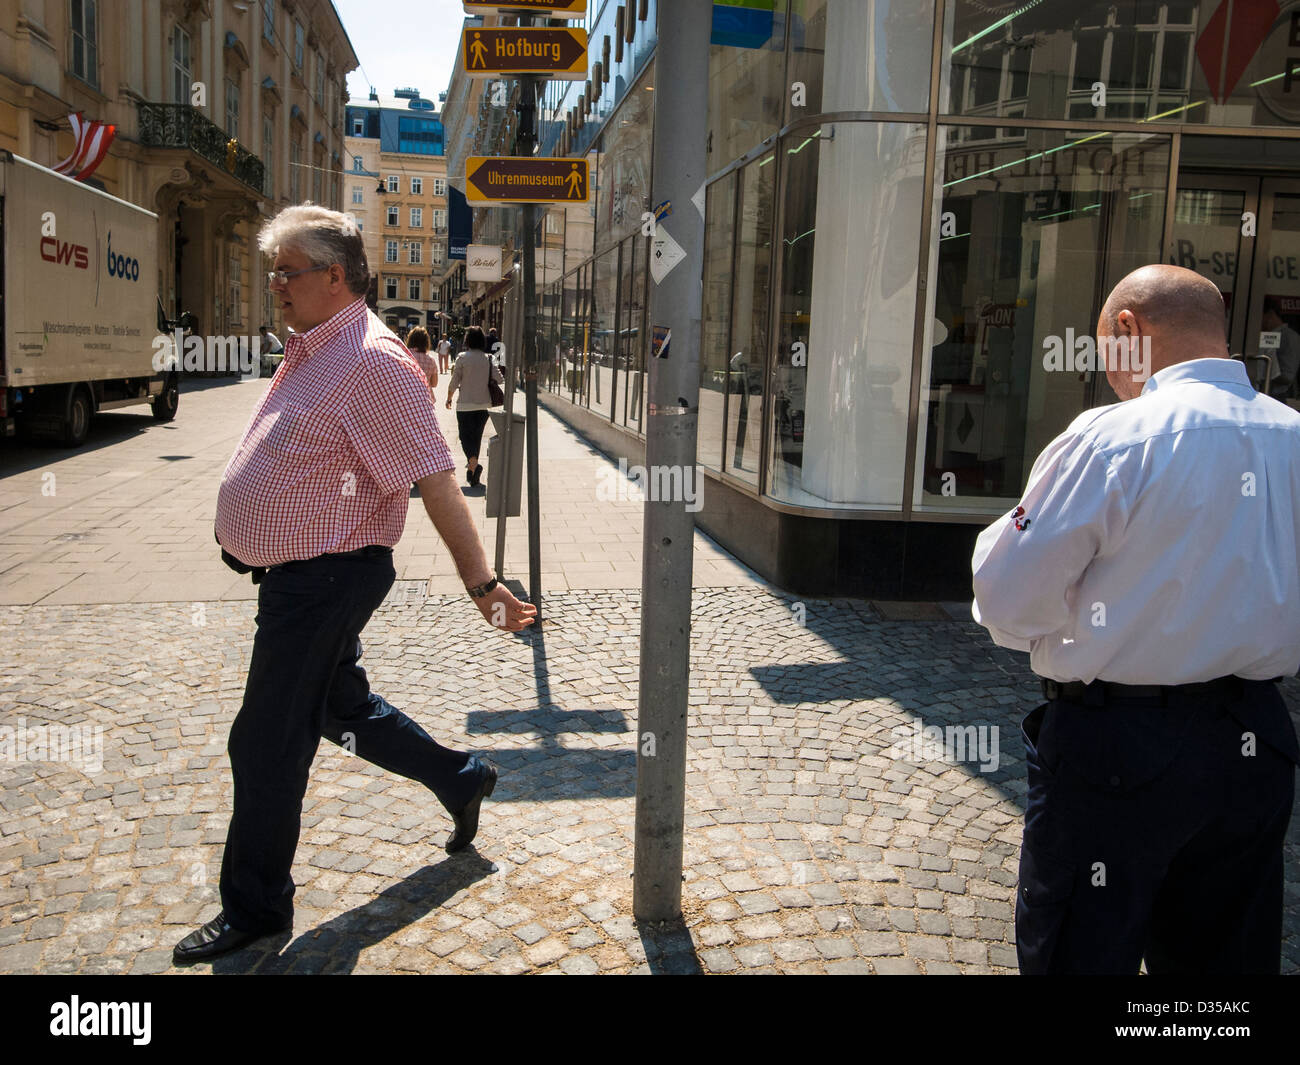 A man in midlle age walking sunny street Stock Photo